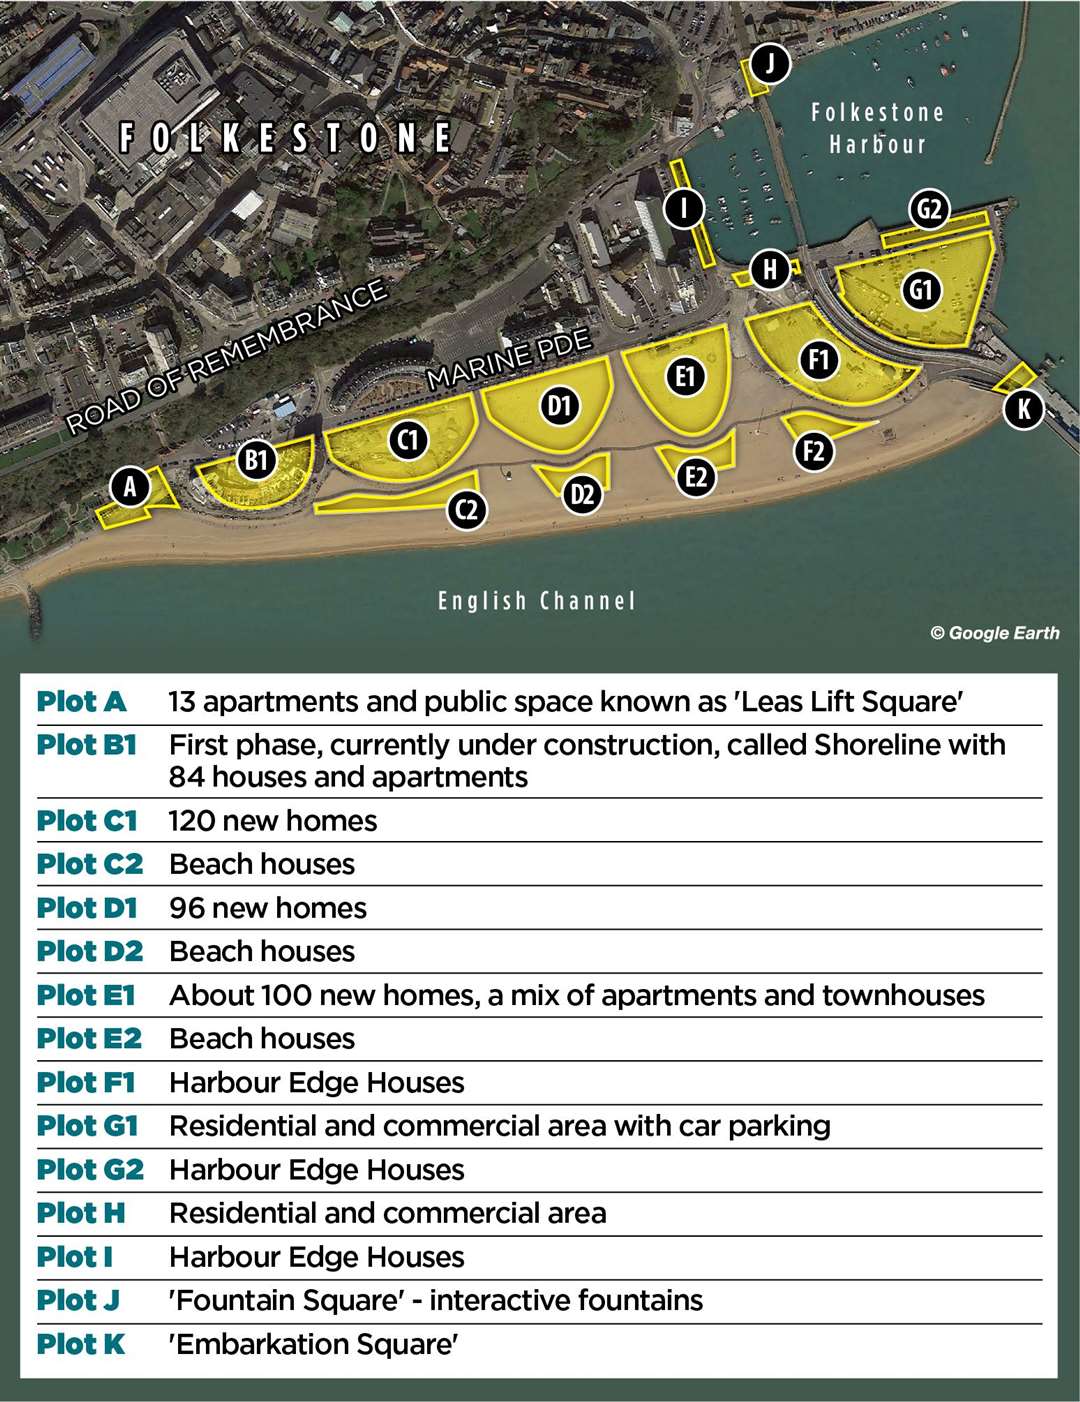 The Folkestone Harbour & Seafront Development Company's masterplan, which has outline planning permission